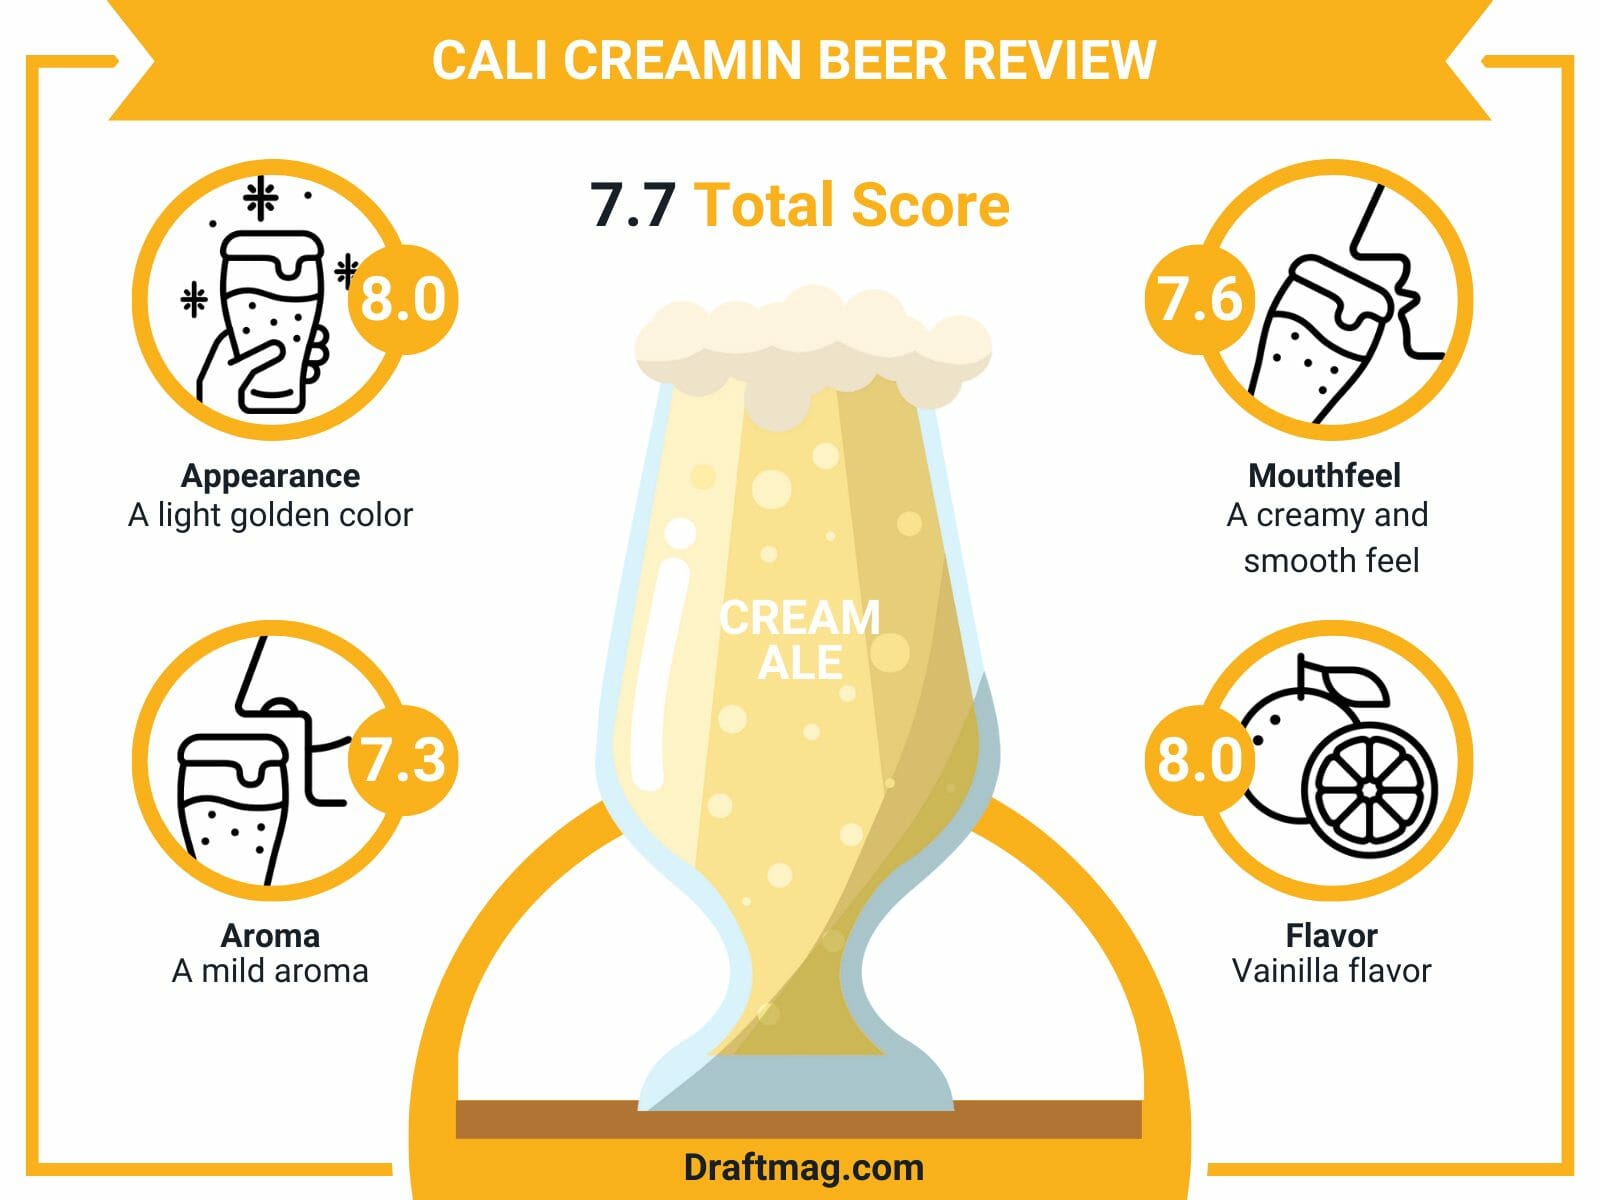 Cali creamin beer review infographic